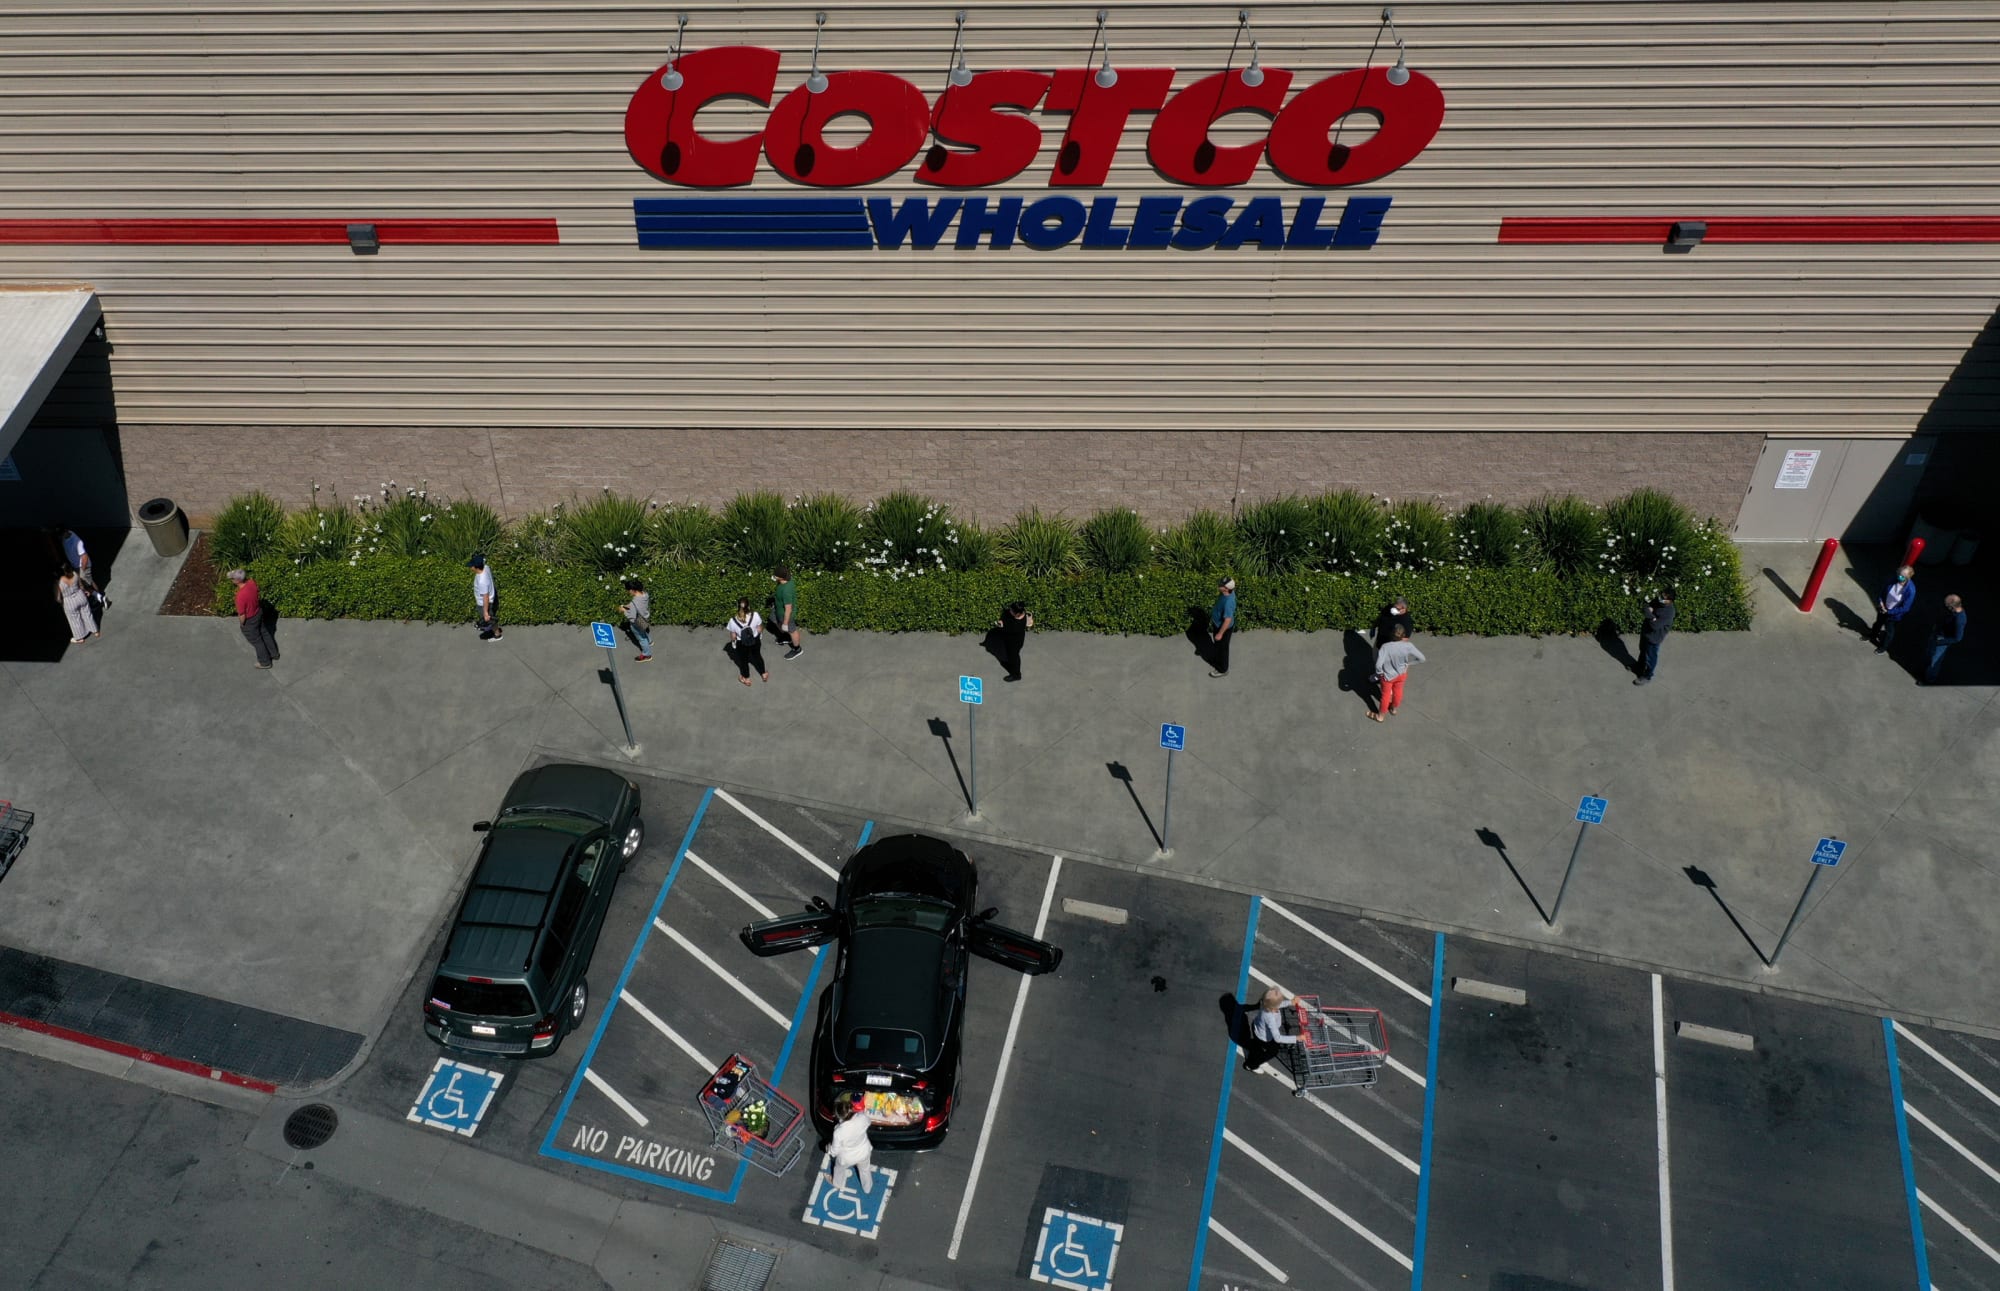 Is Costco Open On Memorial Day 2020?